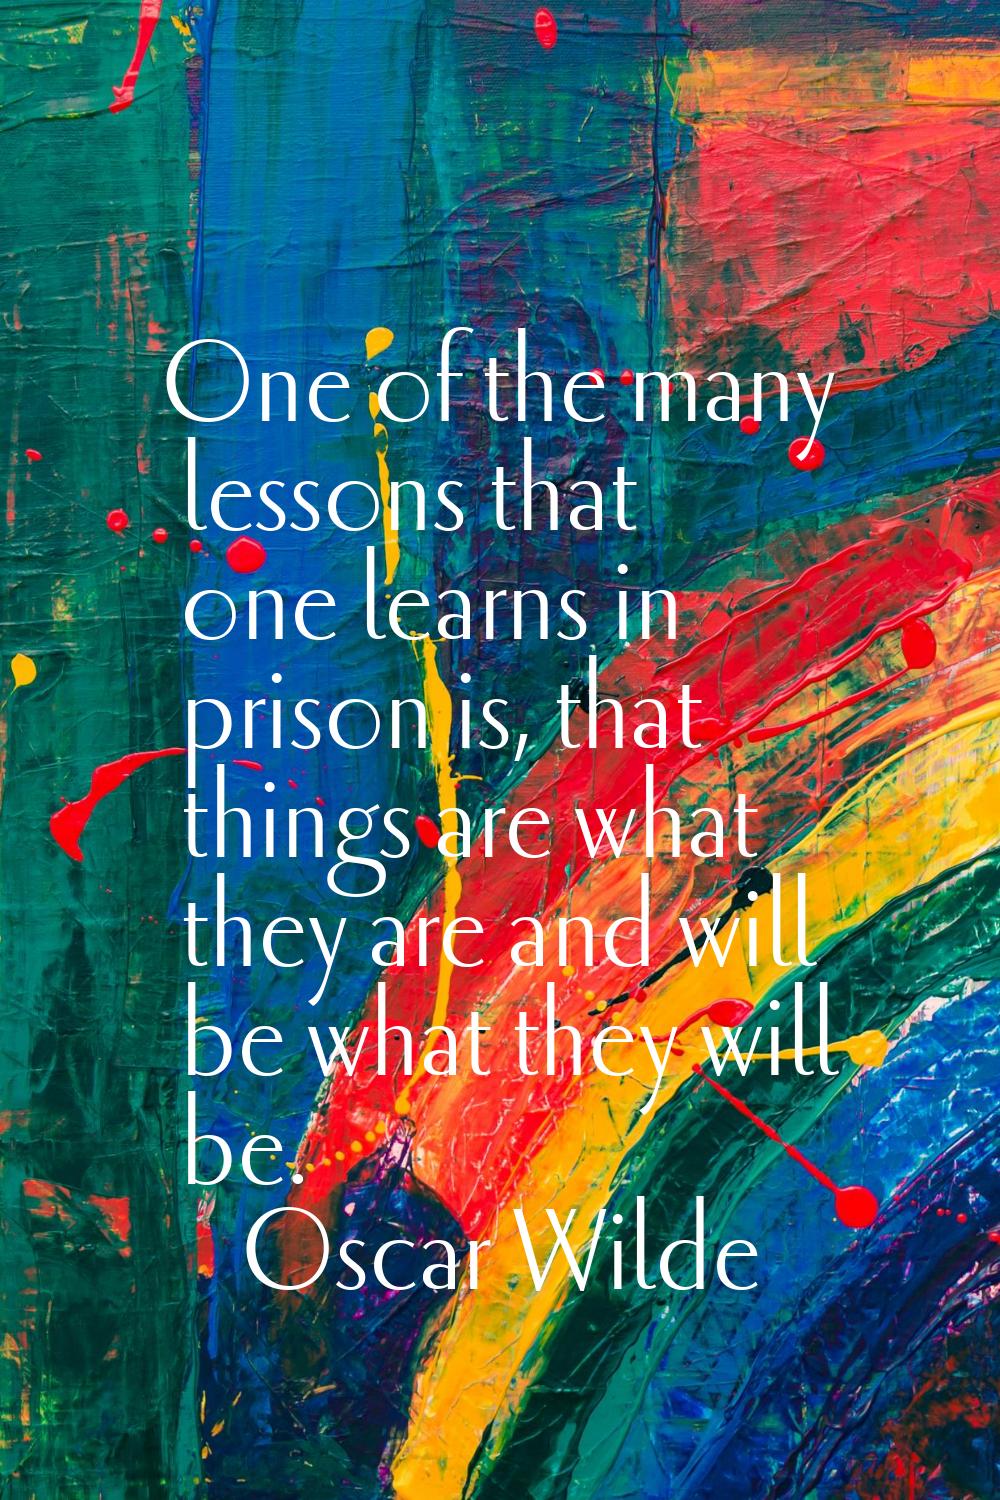 One of the many lessons that one learns in prison is, that things are what they are and will be wha